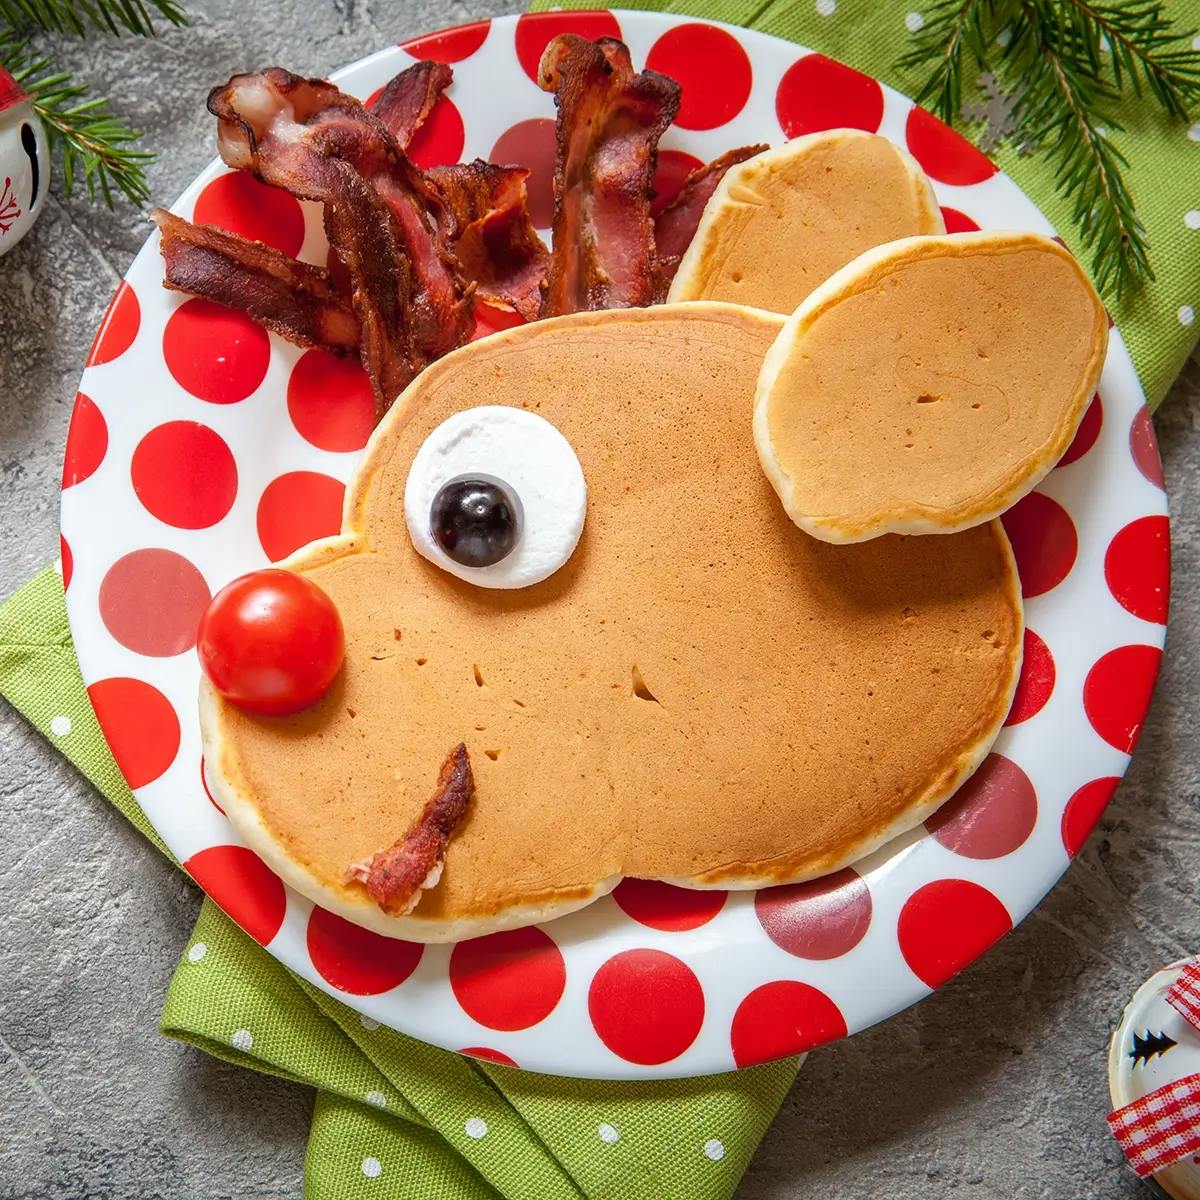 A pancake shaped like Rudolph on a red spotted plate, with bacon for antlers, mozzarella and an olive for eyes, bacon for a mouth and a cherry tomato for the nose.